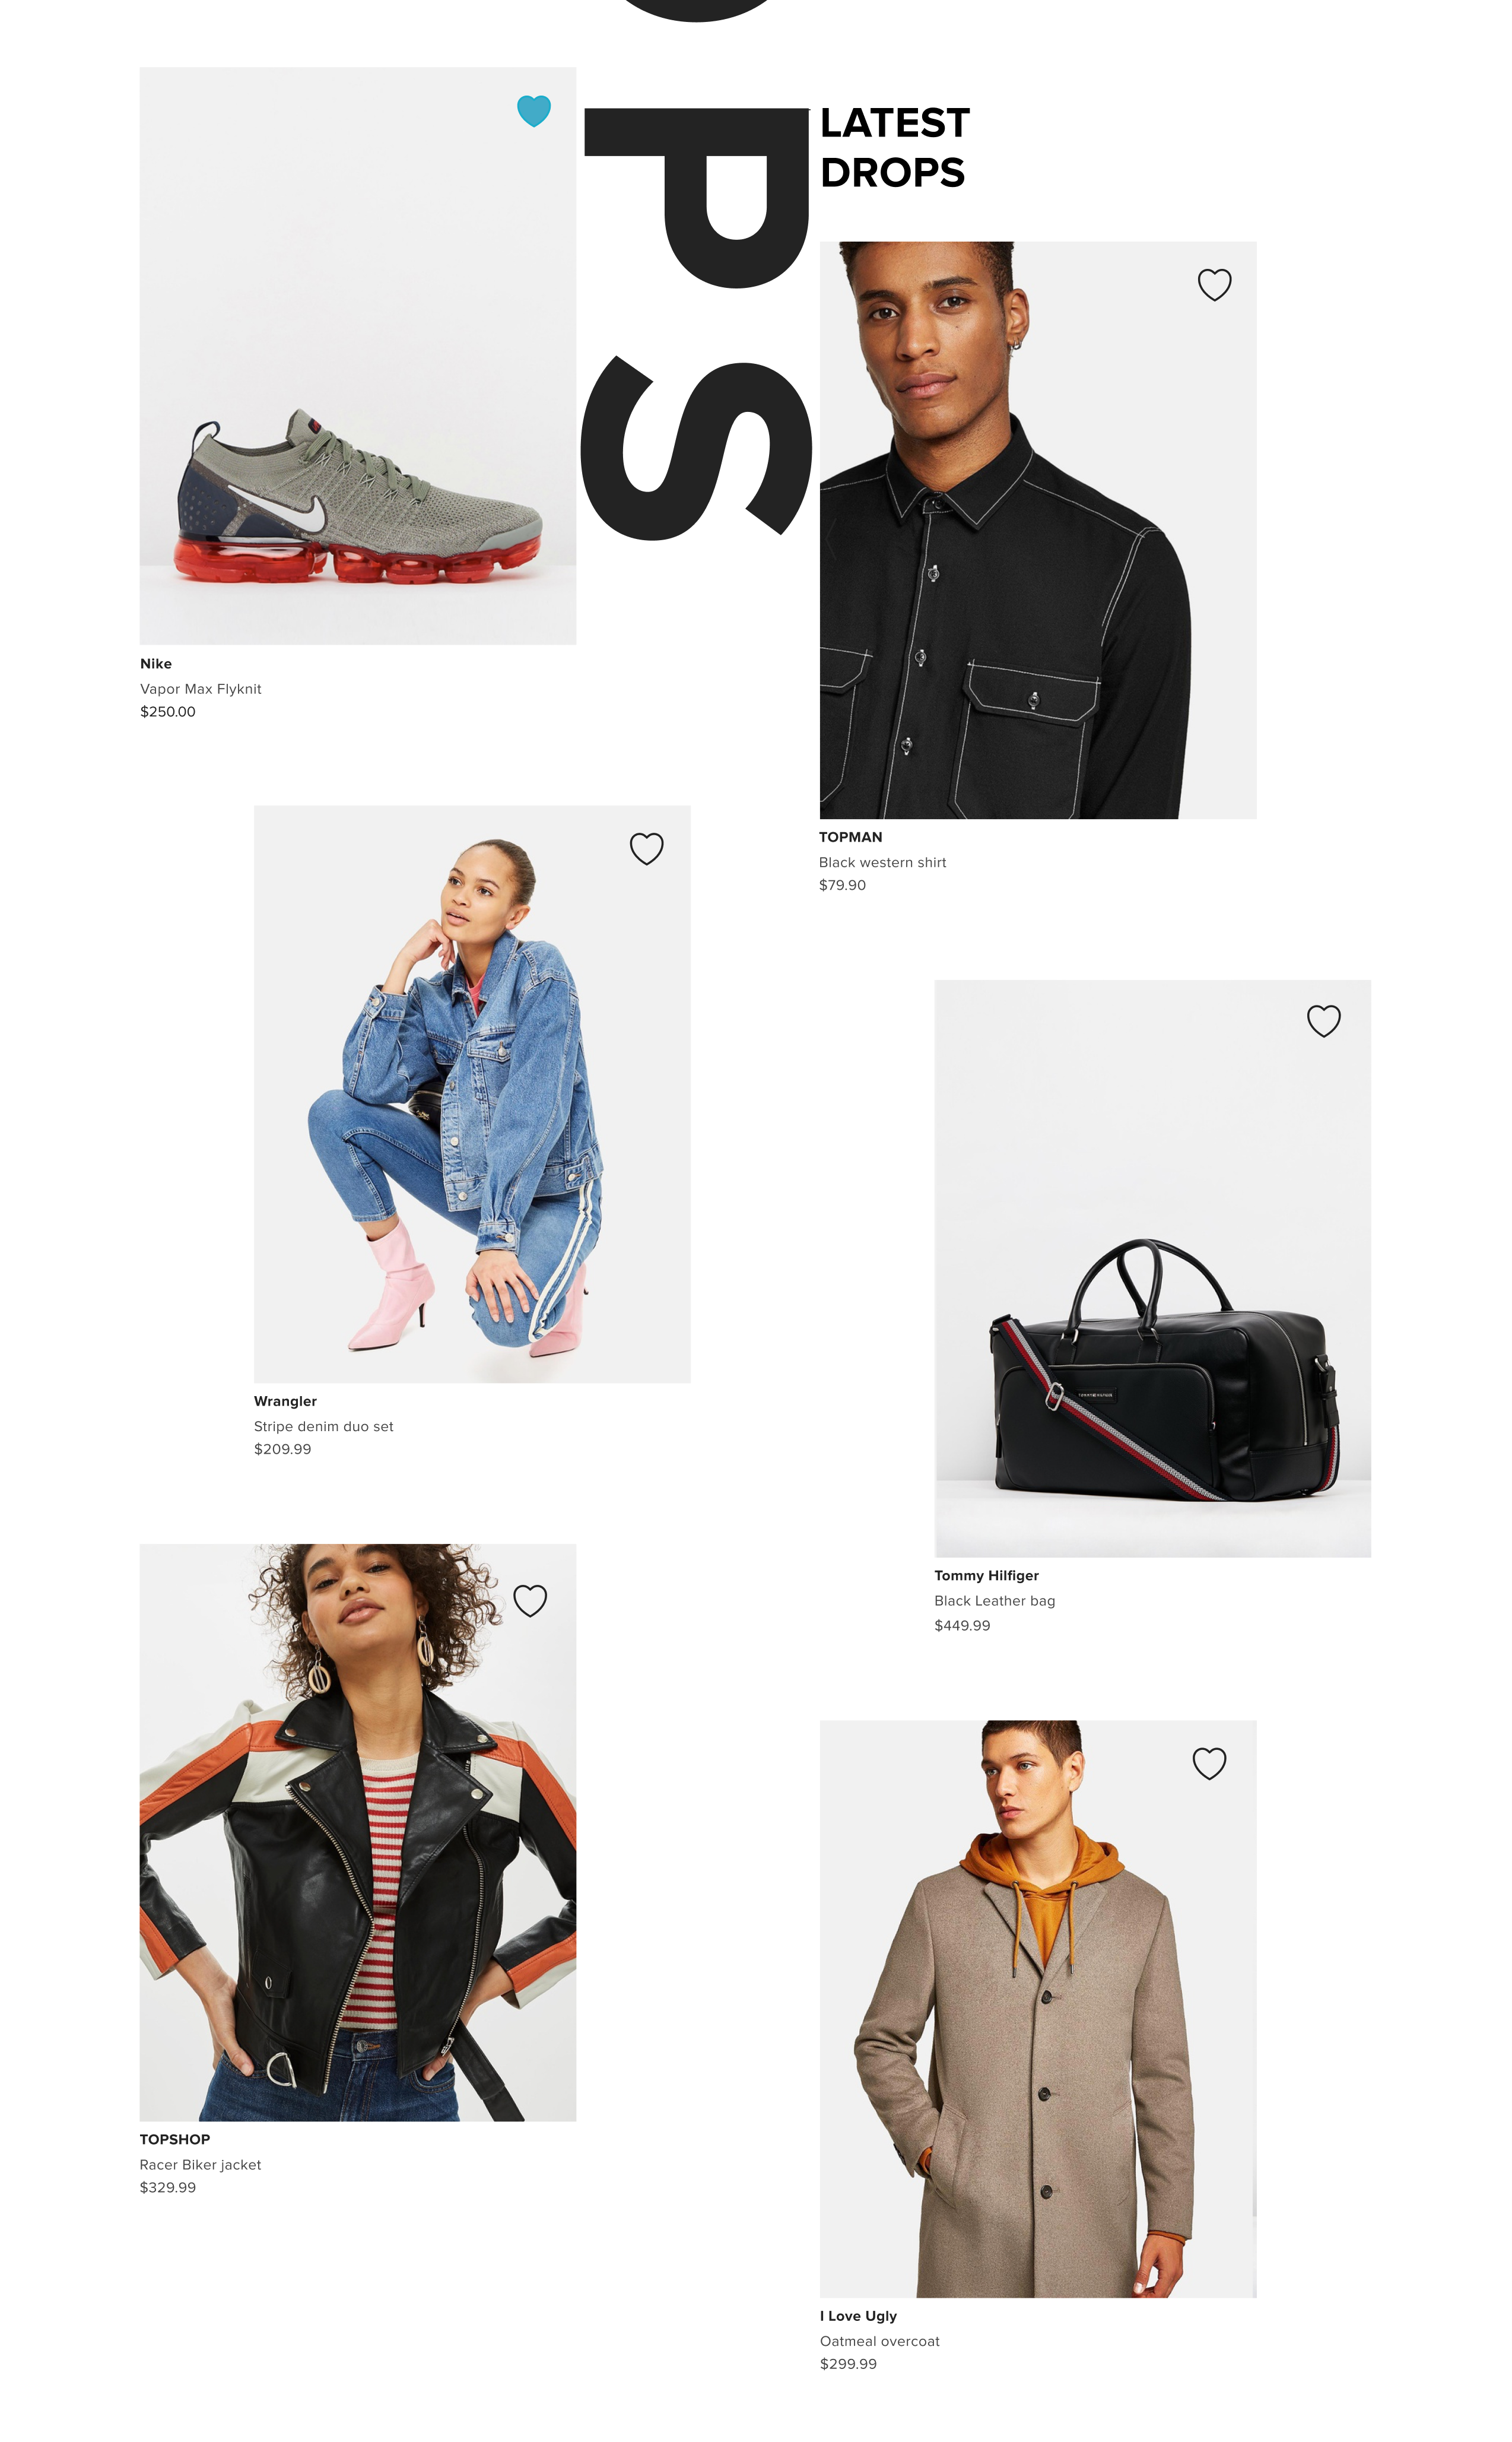 Latest drops module from theiconic.com.au showcasing multiple clothing images flowing downwards